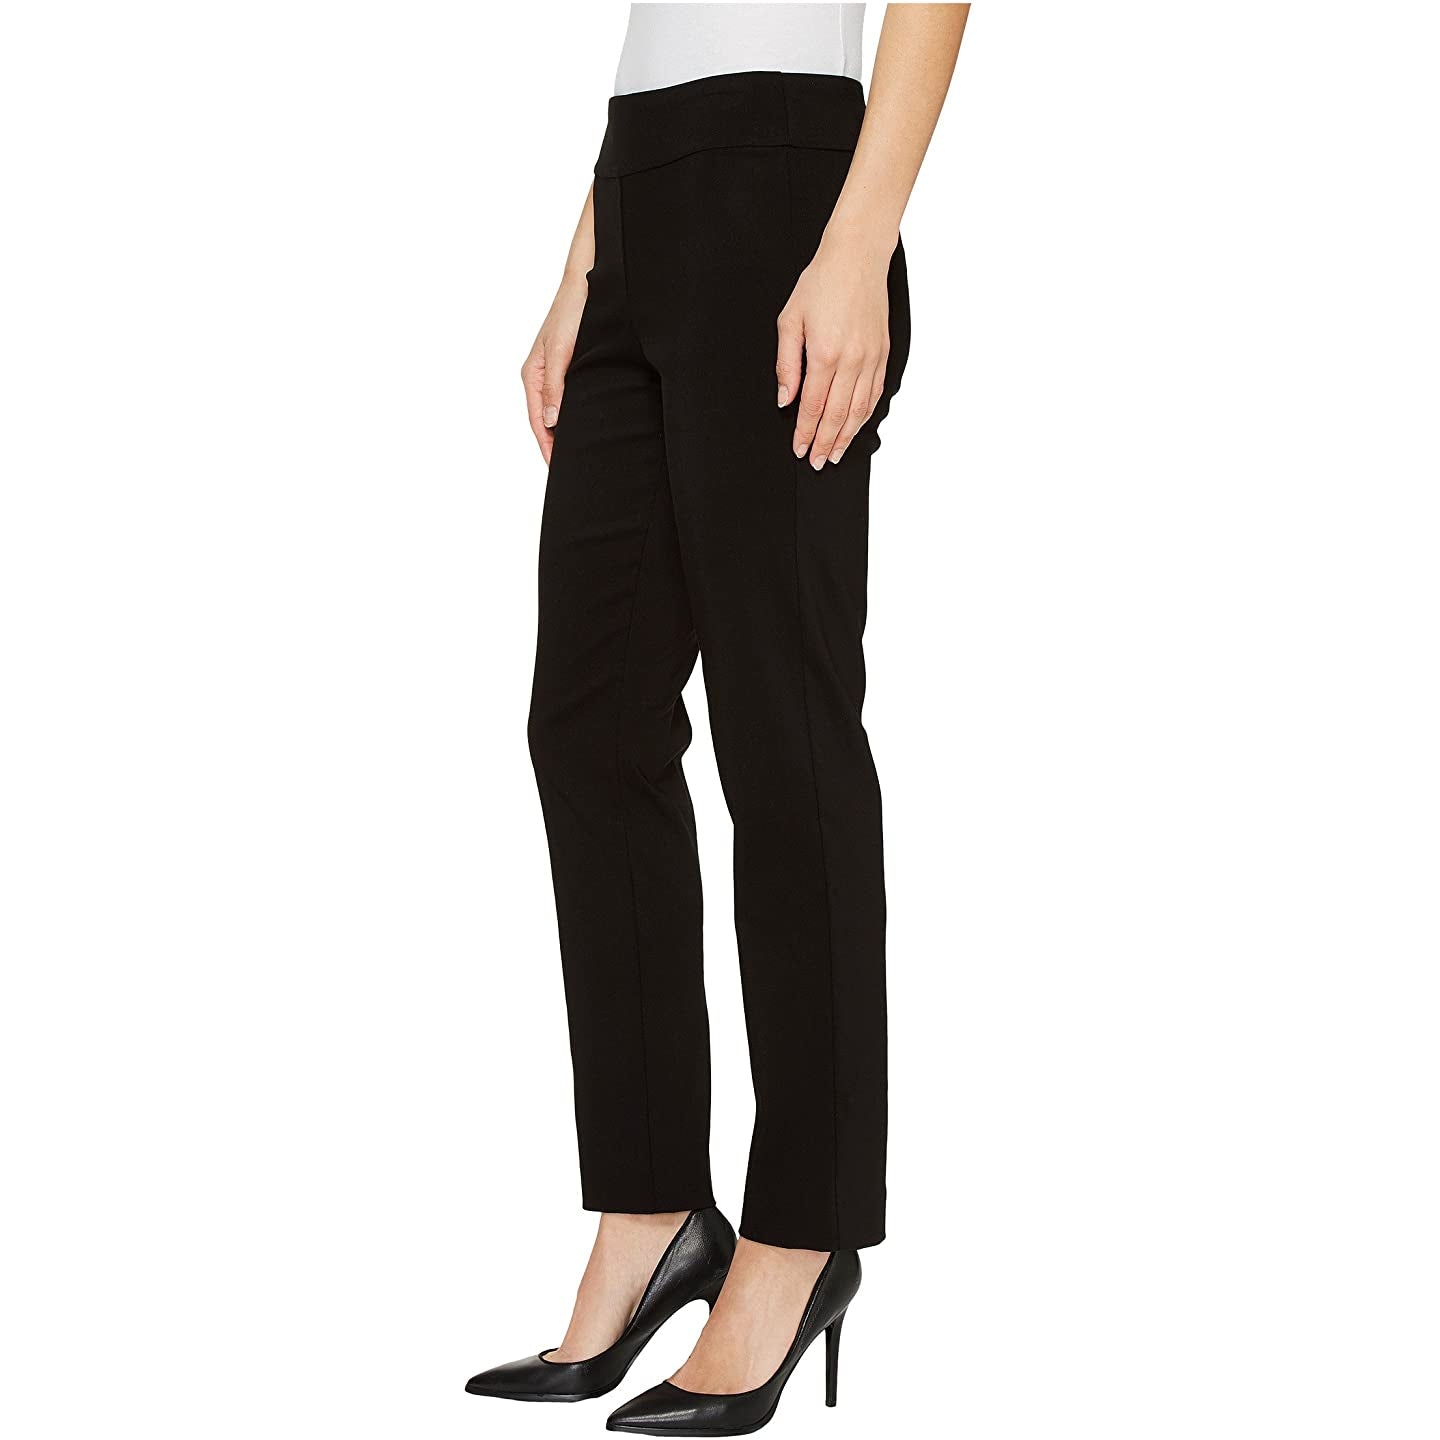 Krazy Larry P-507 28" Pull-on Ankle Pant